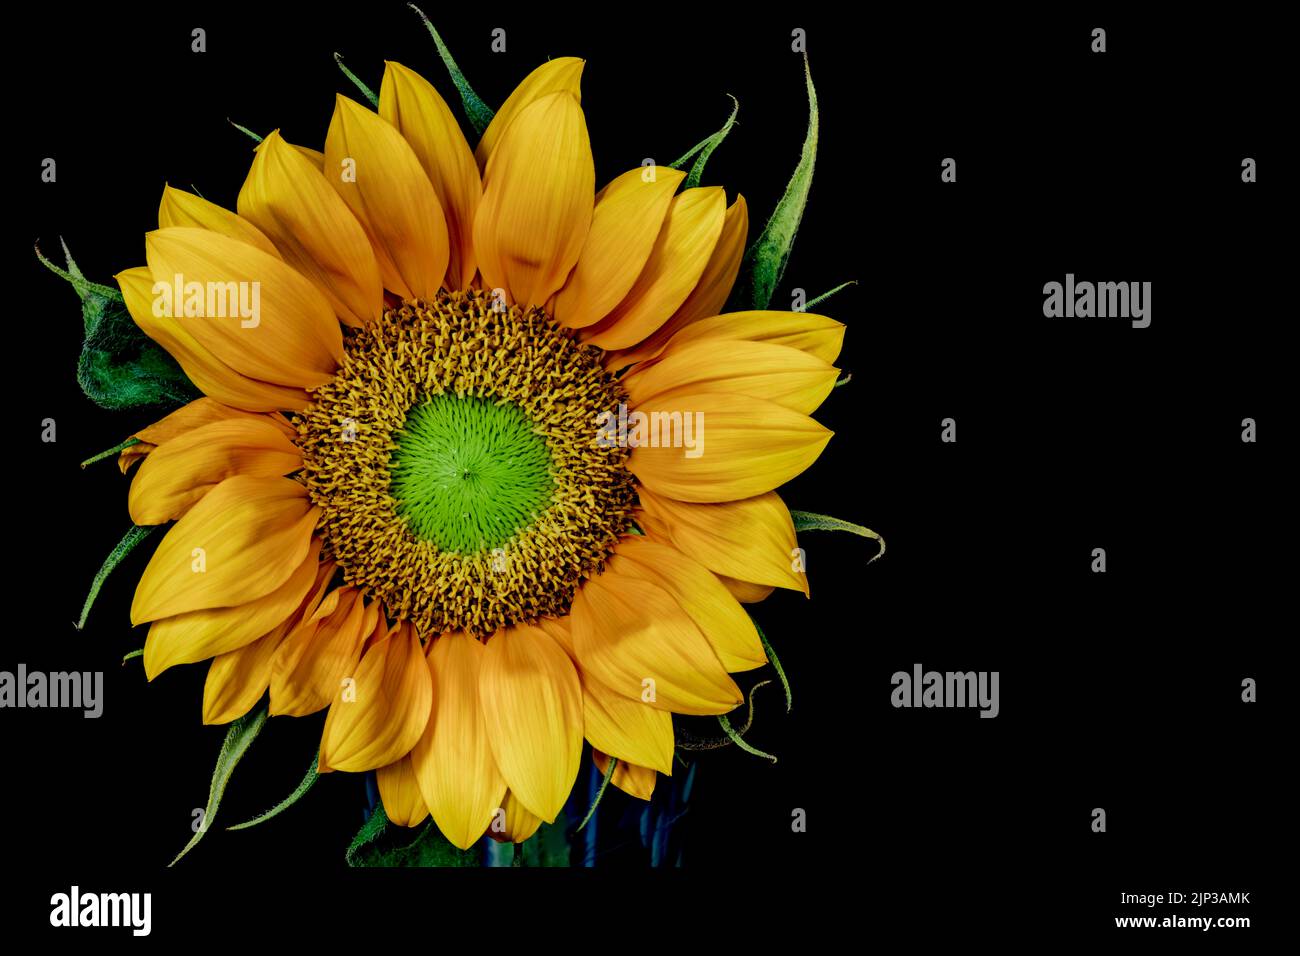 close up of sunflower against black background Stock Photo